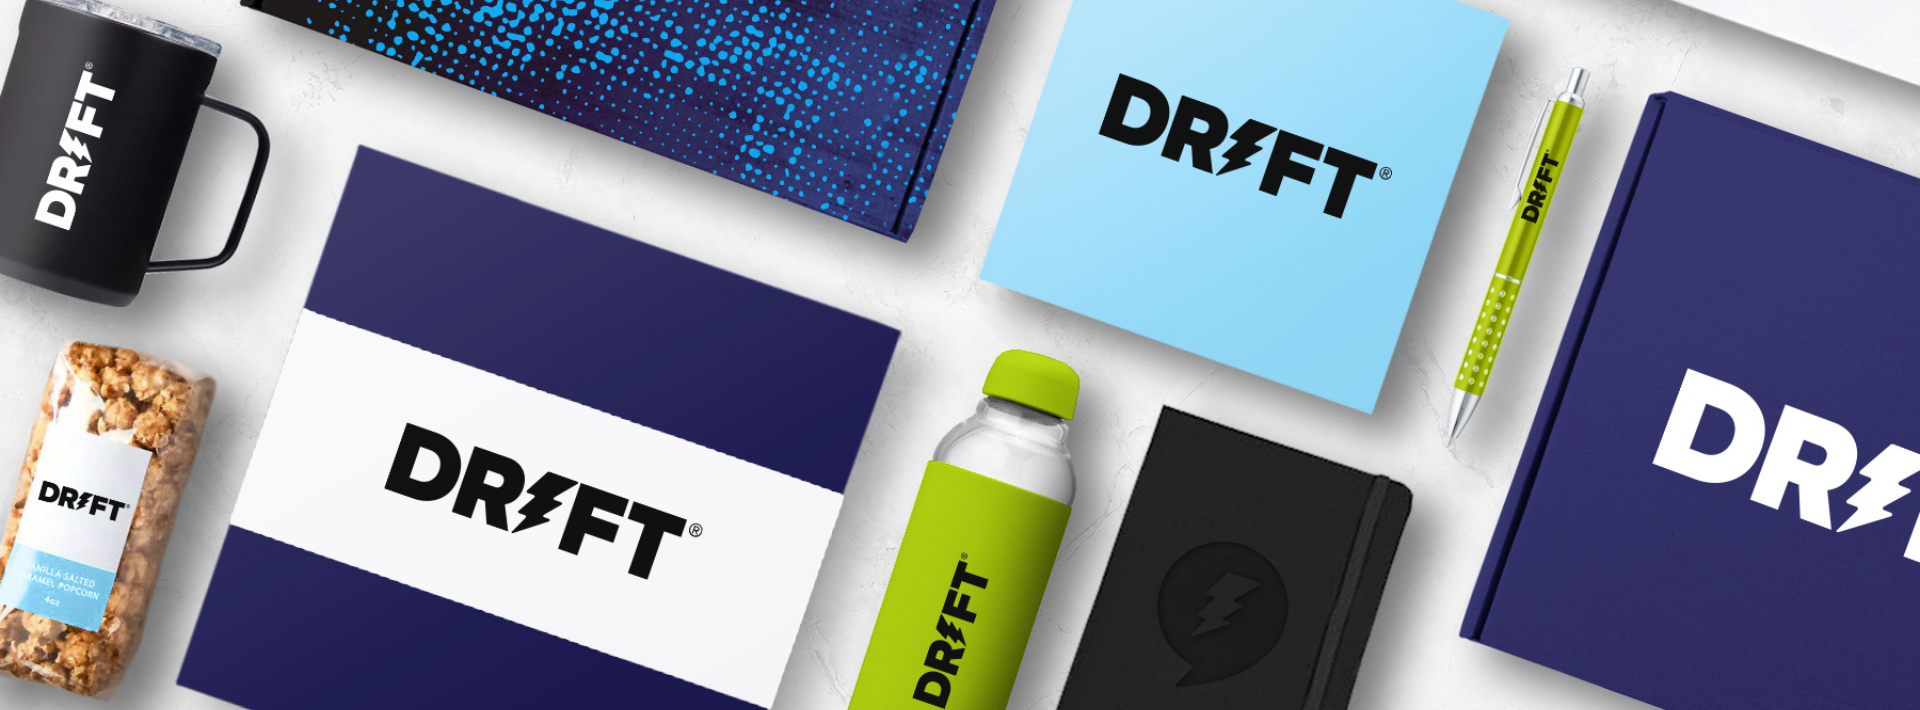 banner featuring branded items for drift